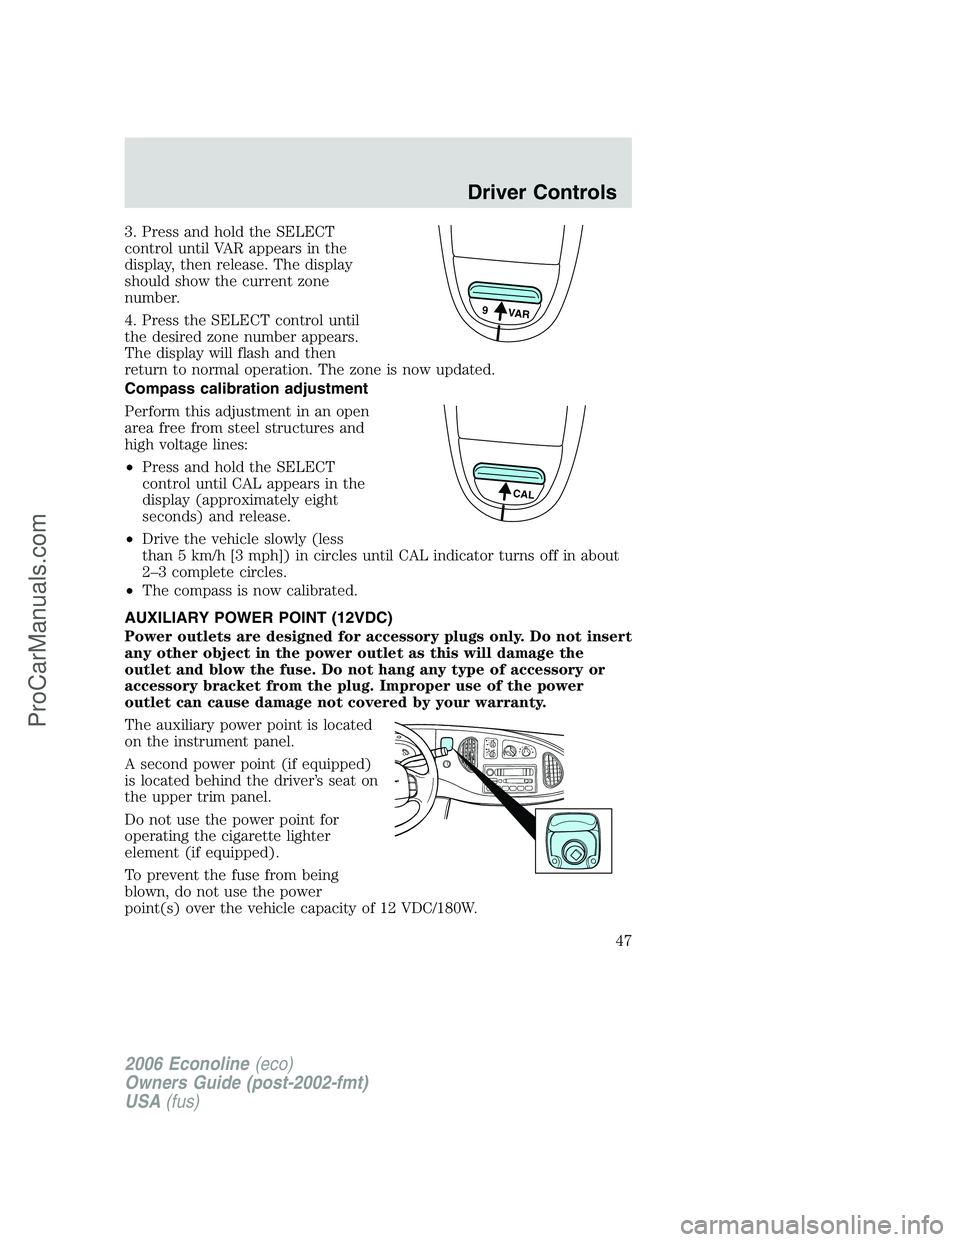 FORD E-150 2006 Service Manual 3. Press and hold the SELECT
control until VAR appears in the
display, then release. The display
should show the current zone
number.
4. Press the SELECT control until
the desired zone number appears.